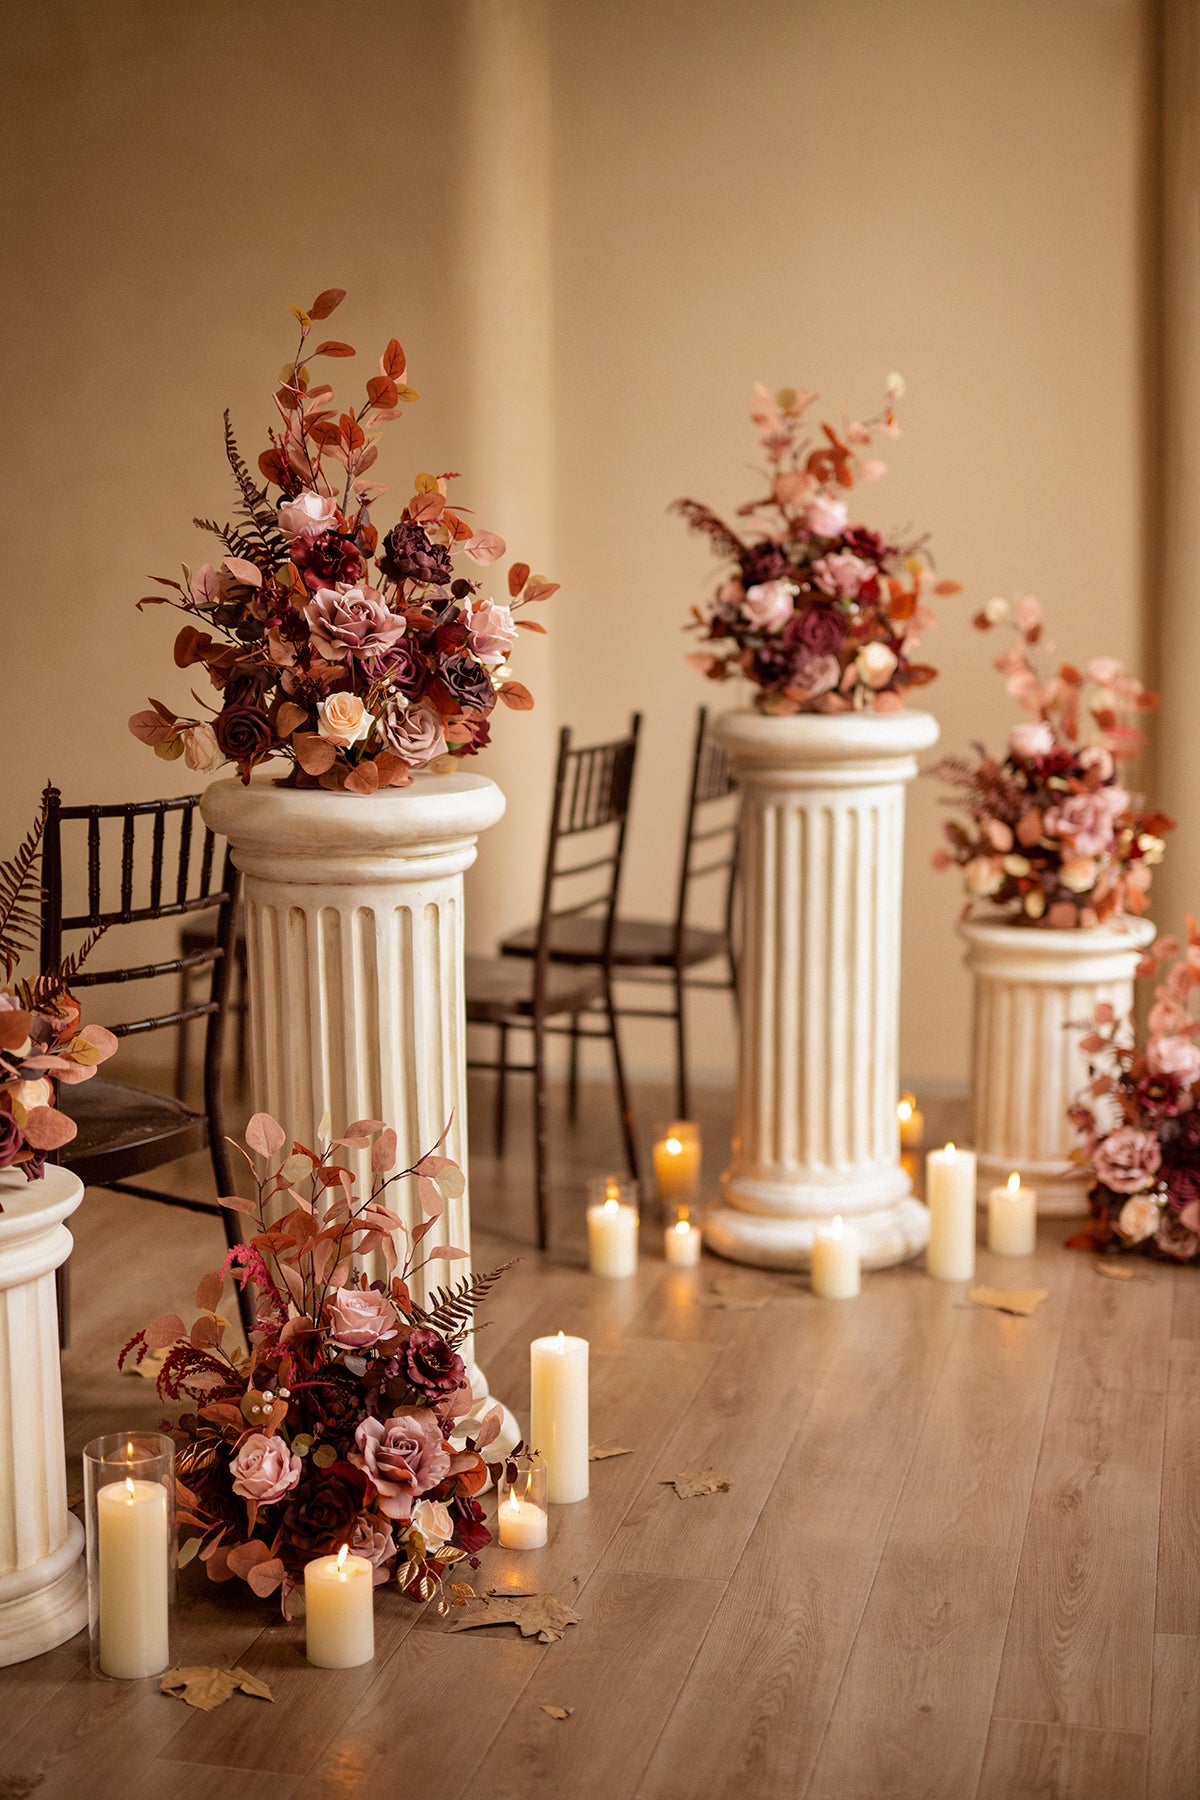 Wedding Aisle & Chair Decor  Burgundy & Dusty Rose Free-Standing Flower  Arrangements for Arch/Aisle Decor (Set of 2) - – Ling's Moment